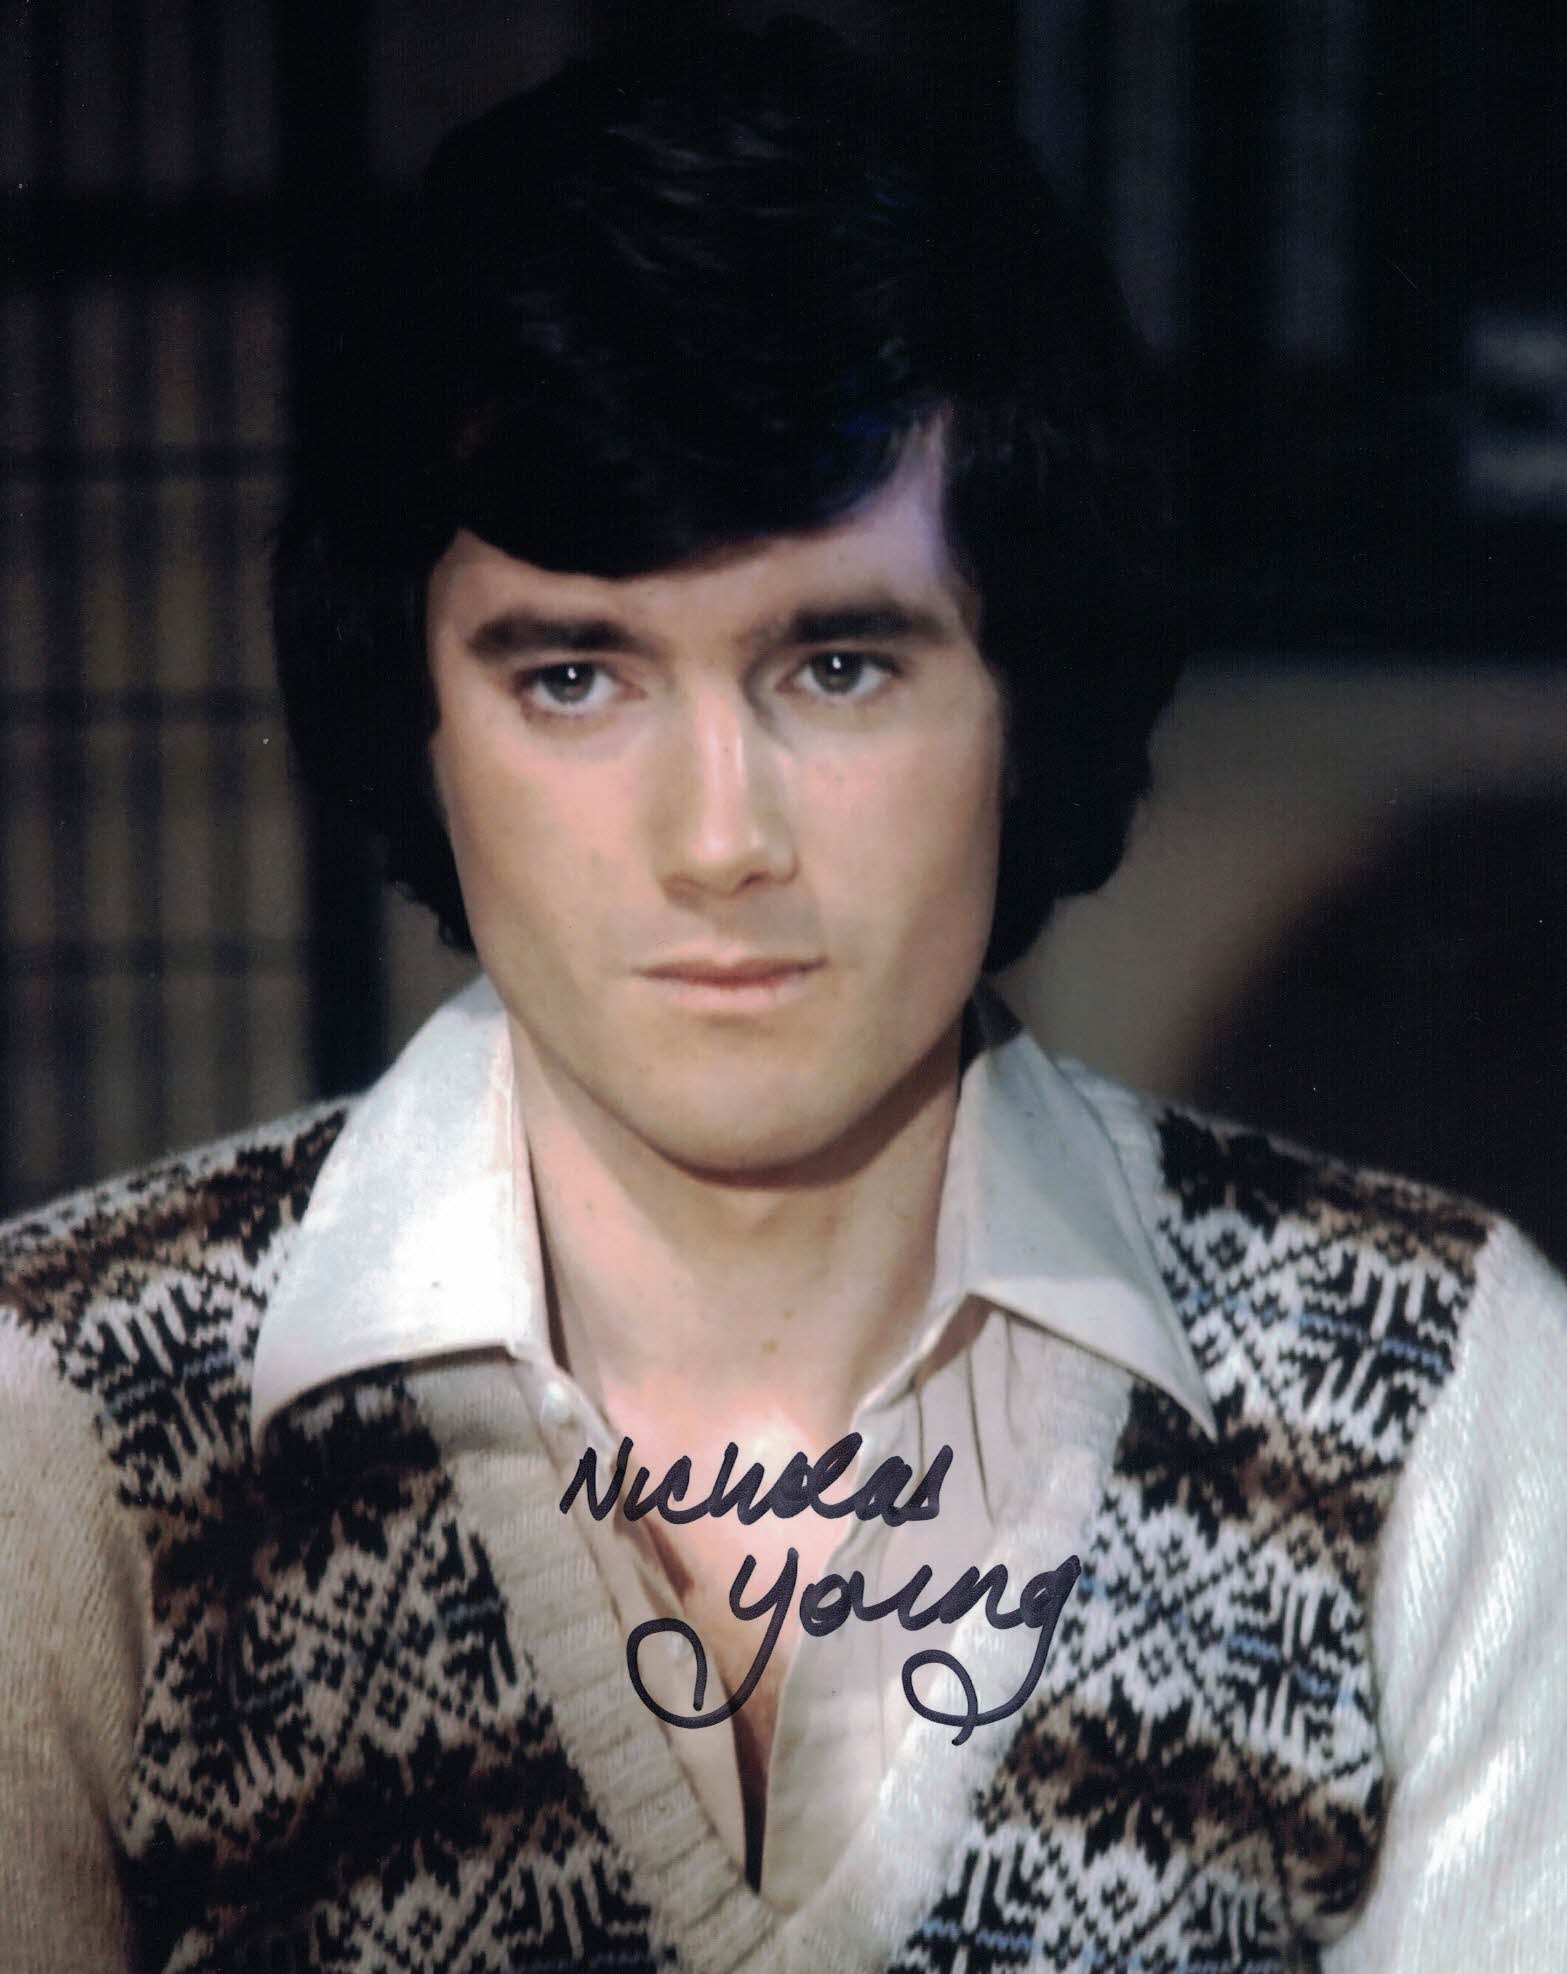 NICHOLAS YOUNG - John in The Tomorrow People  Hand signed photo